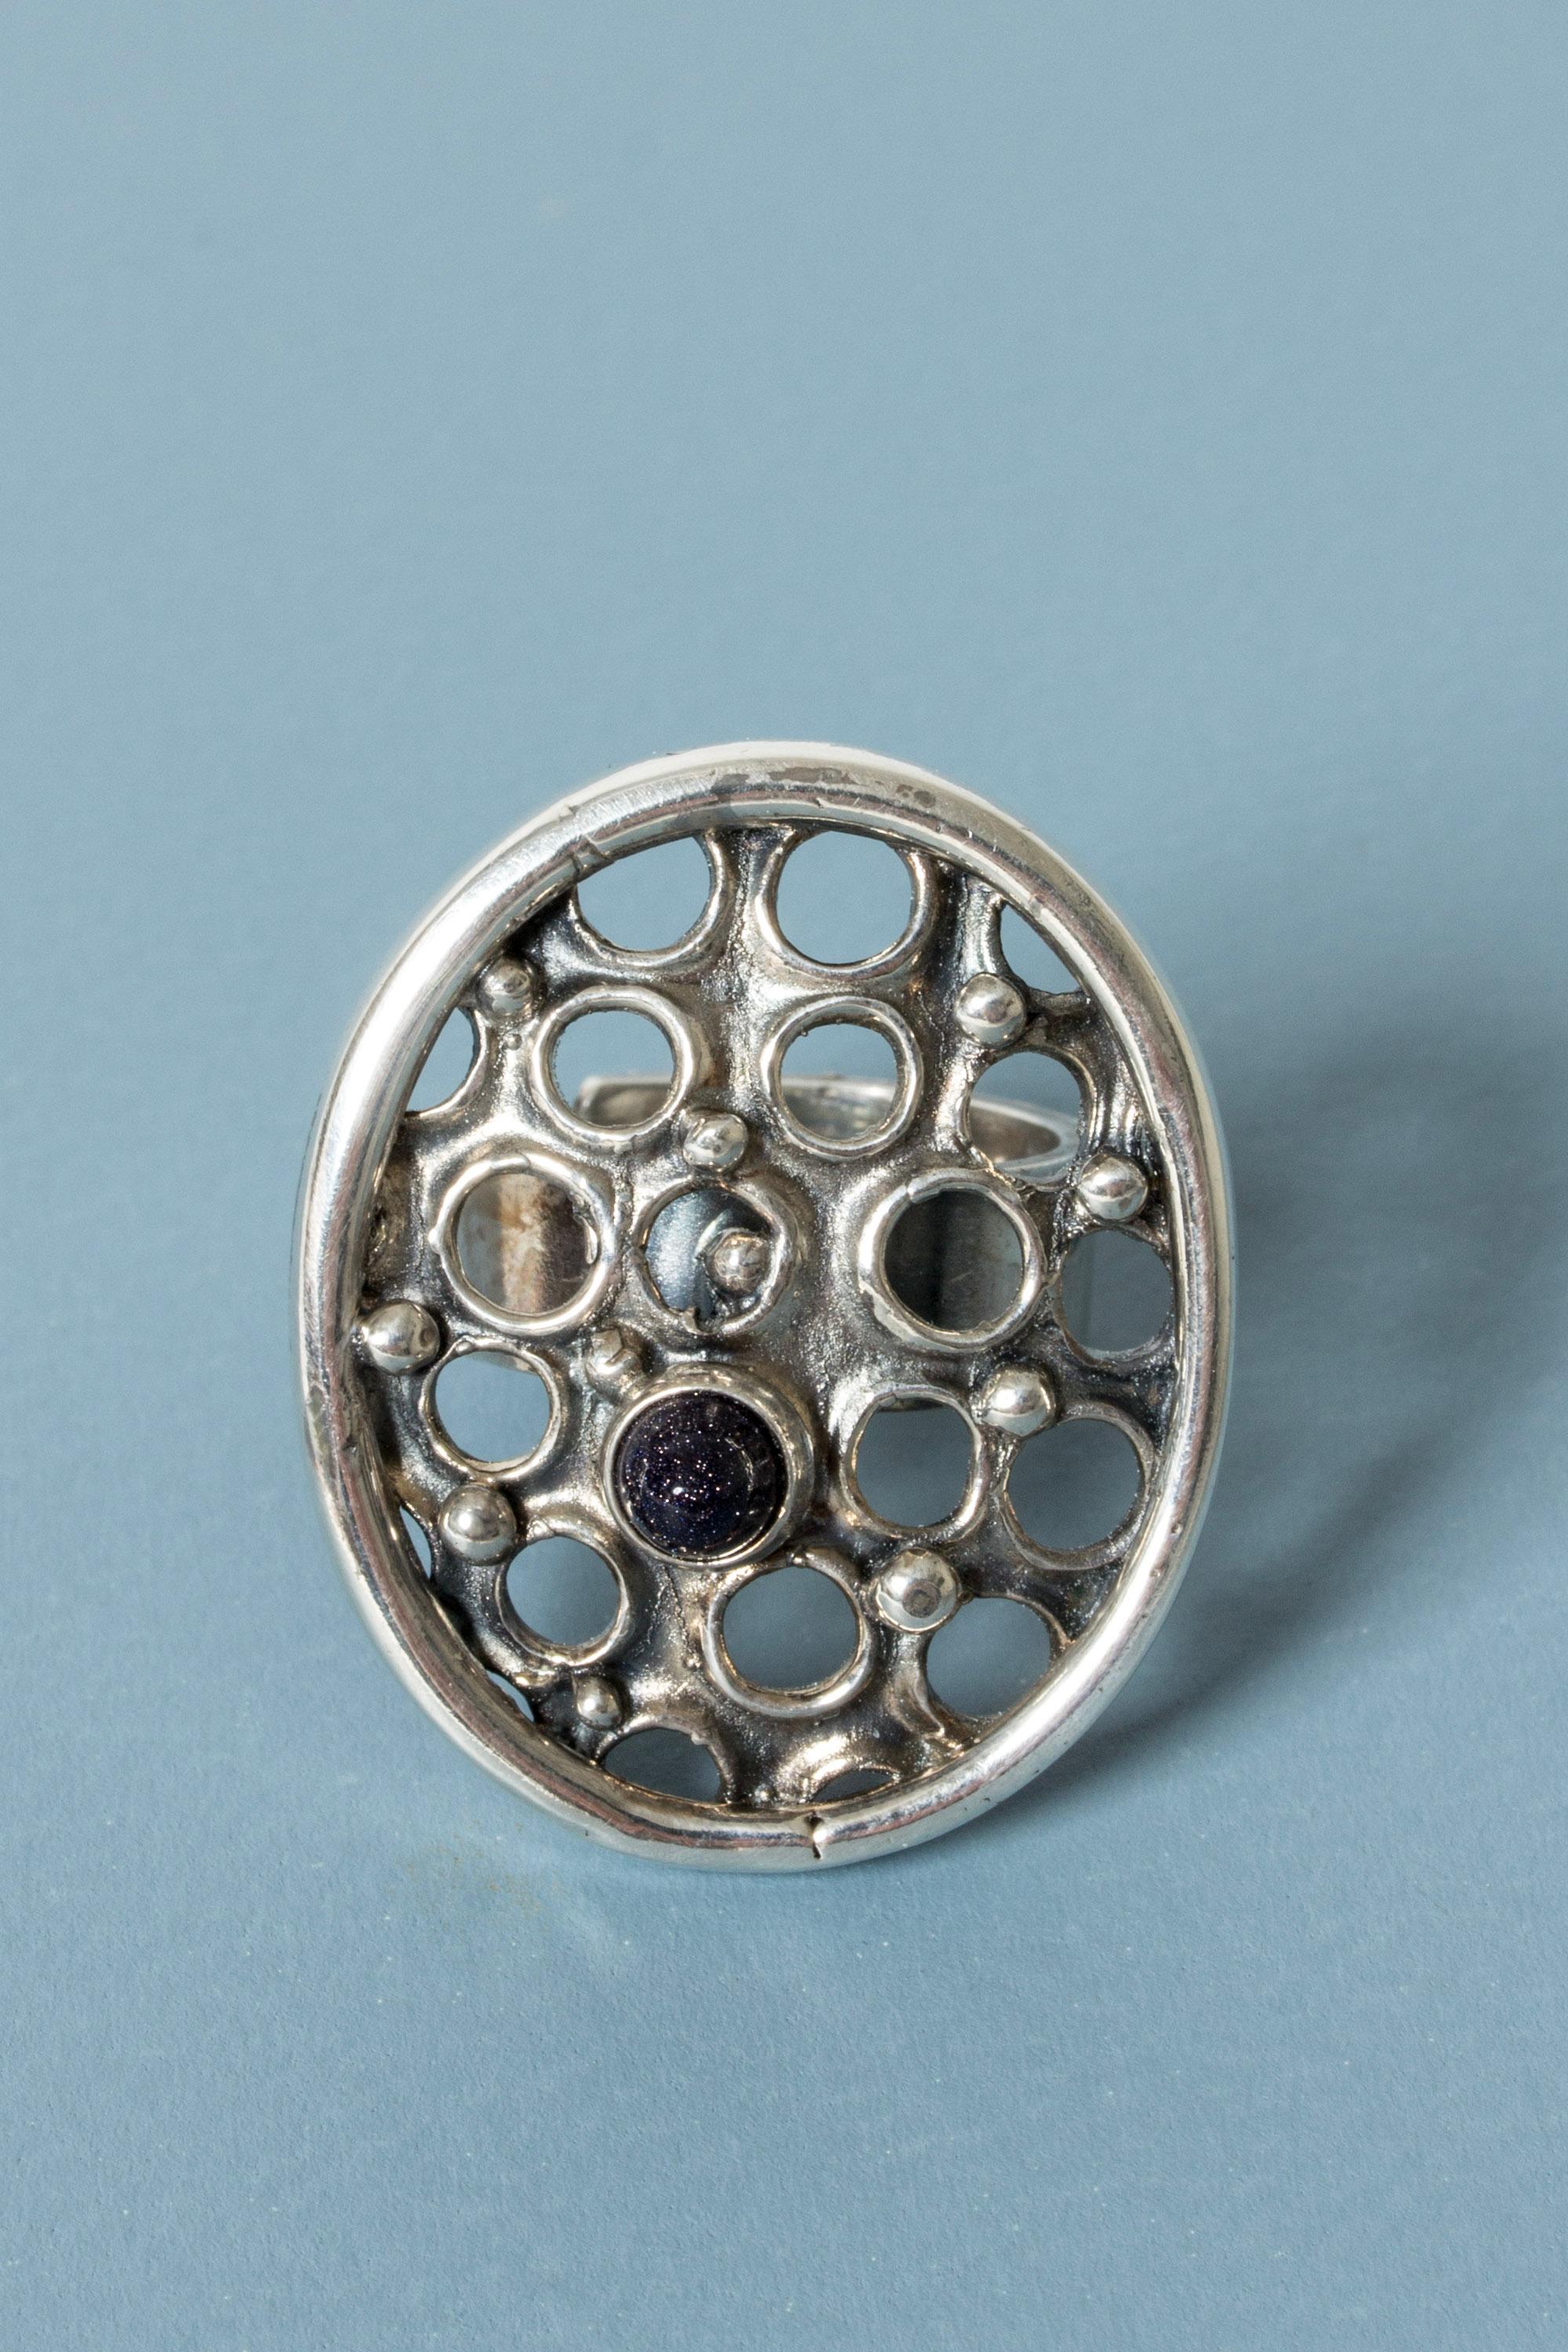 Expressive silver ring by Jorma Laine, with a large oval perforated with holes. A small bullet cut blue goldstone adds extra sparkle.

Jorma Laine was one of the most unique voices in the history of Scandinavian jewelry, and is considered one of the